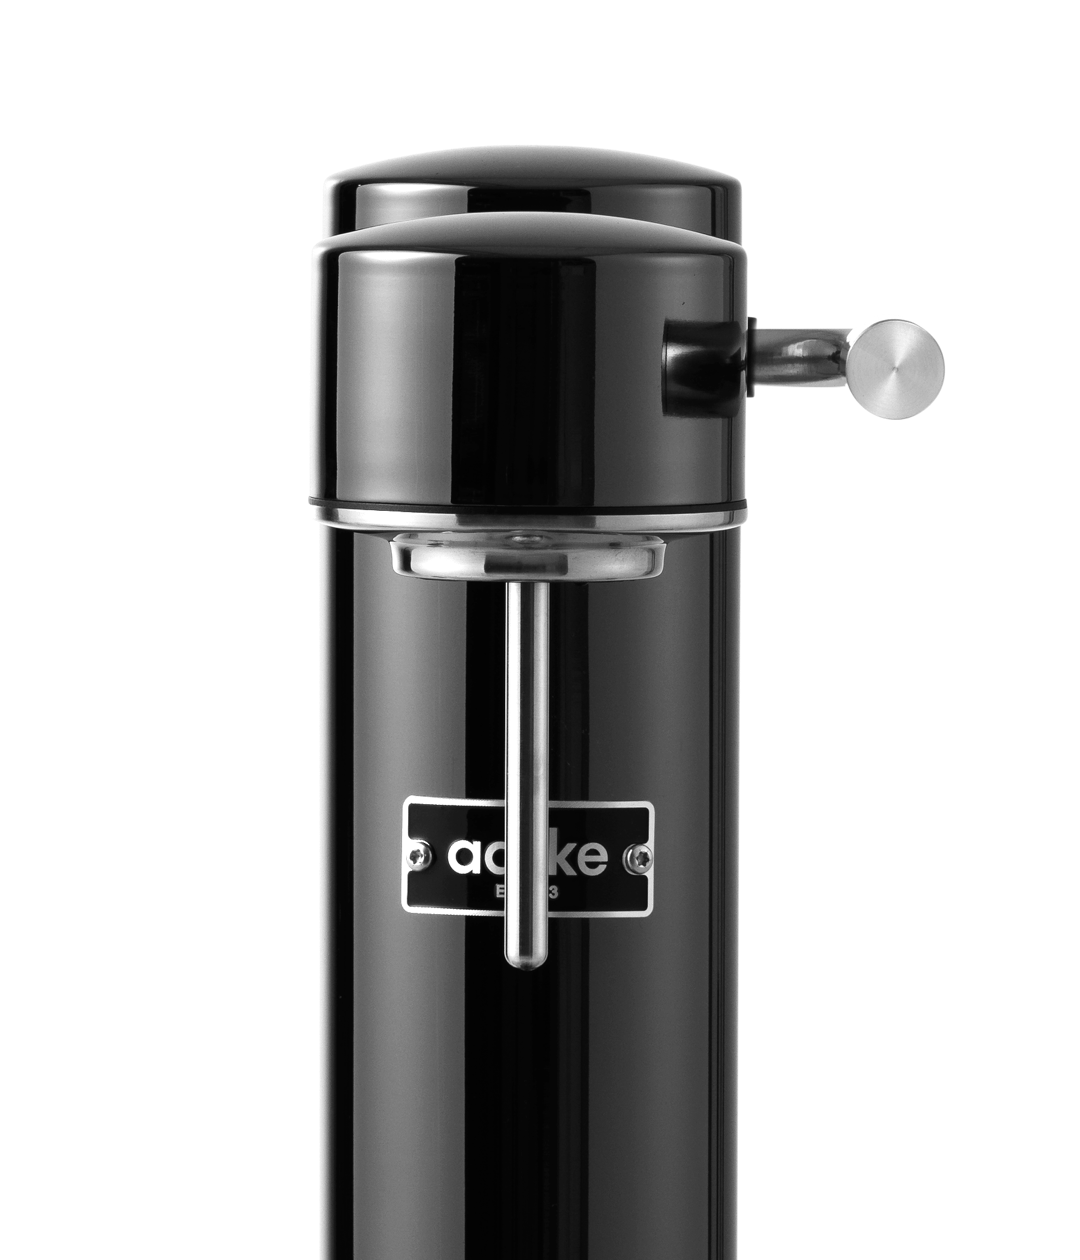 Aarke Carbonator 3 in Black Chrome. Front close up of nozzle.